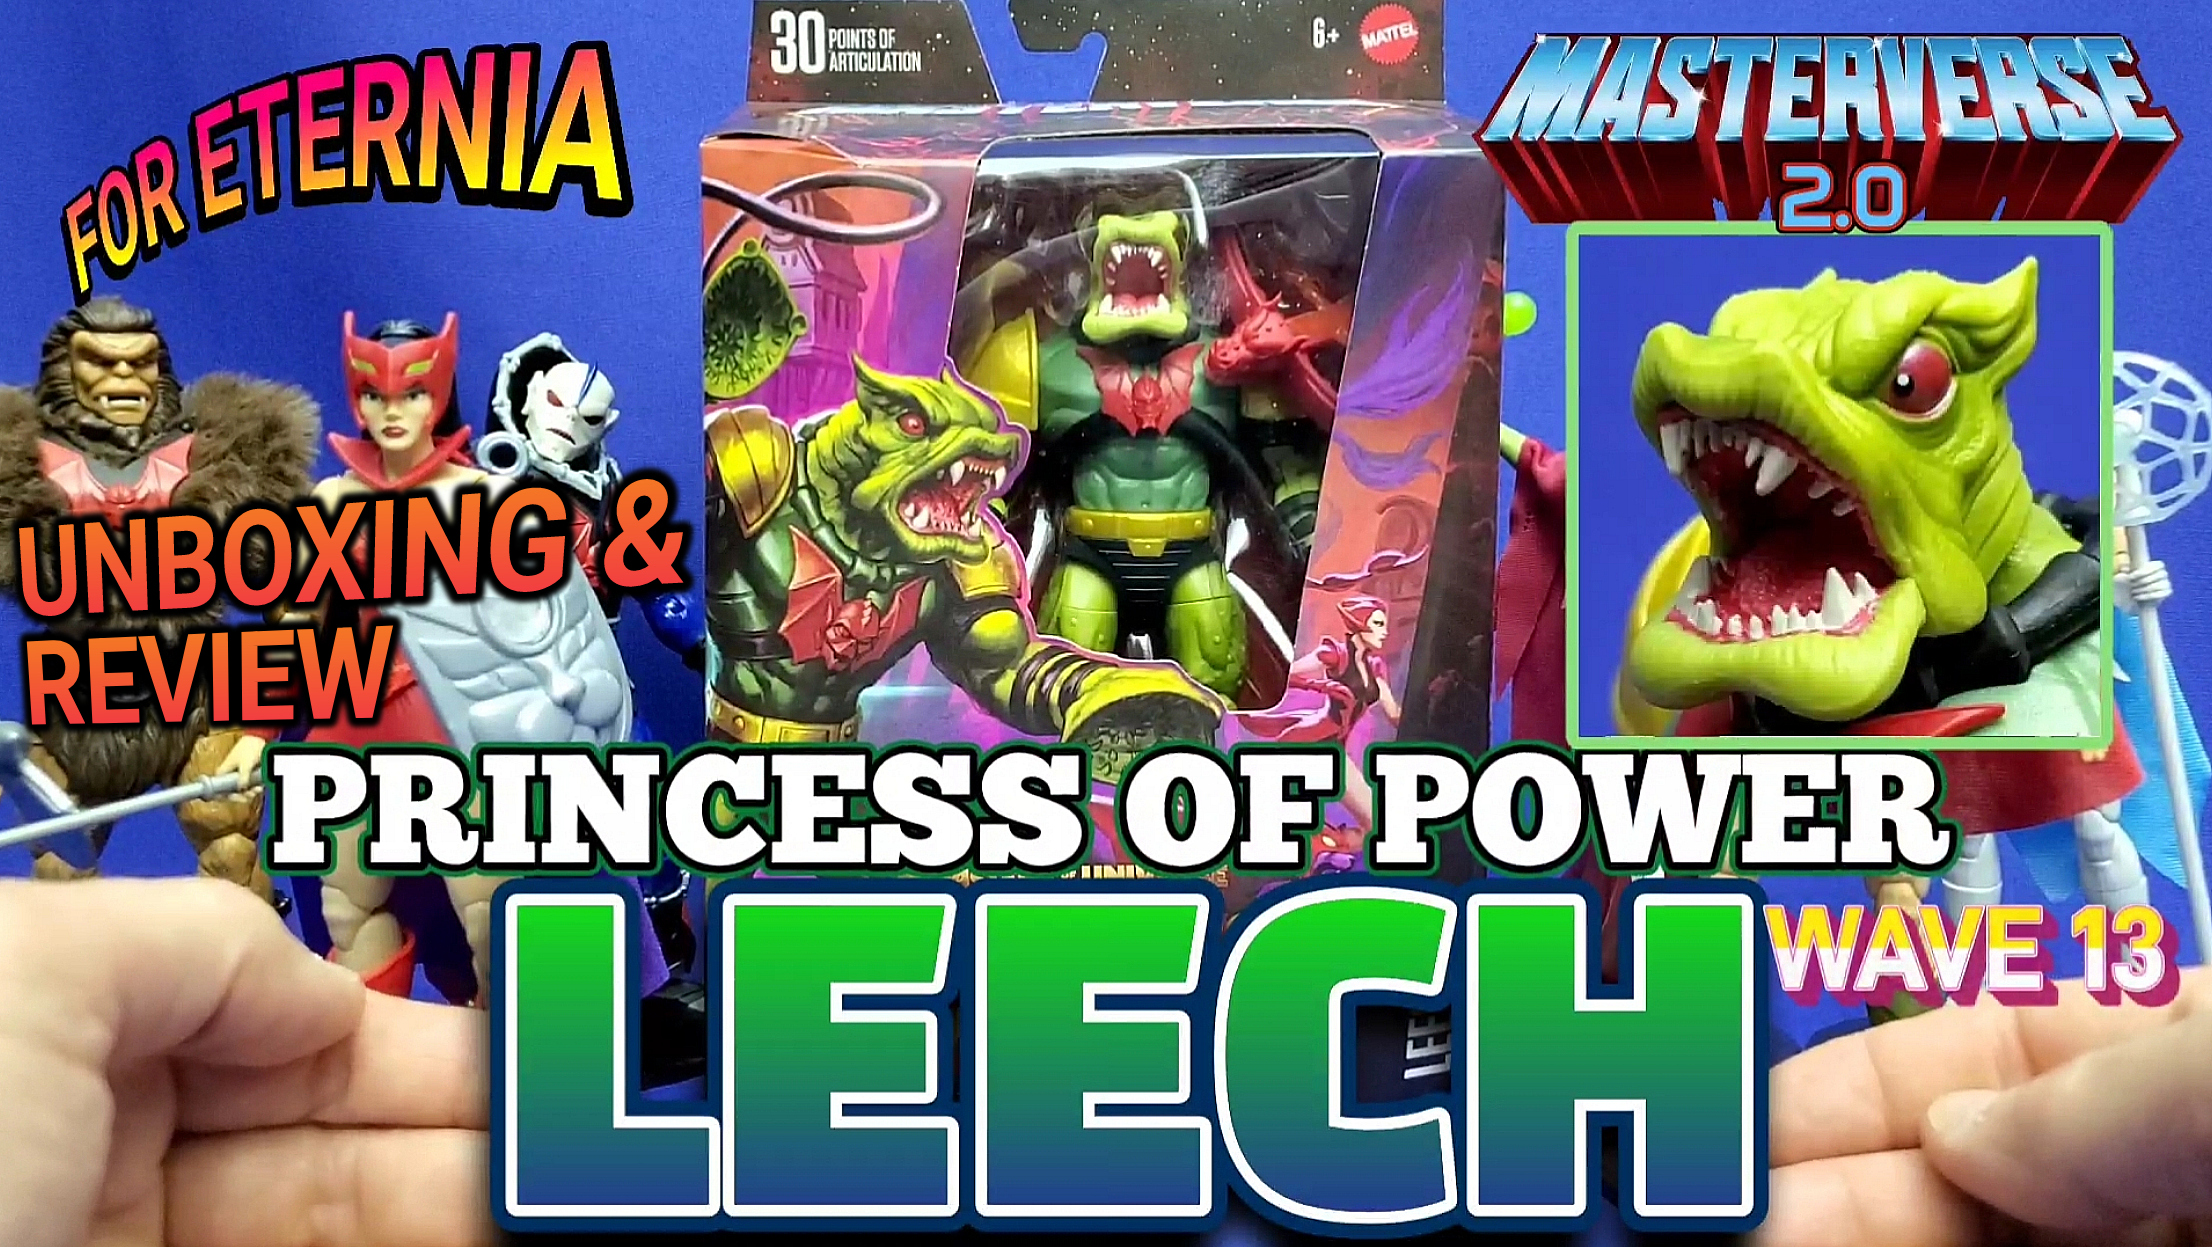 UNBOXING & REVIEW: Masterverse LEECH Wave 13 Masters of the Universe: ”Princess of Power” Action Figure